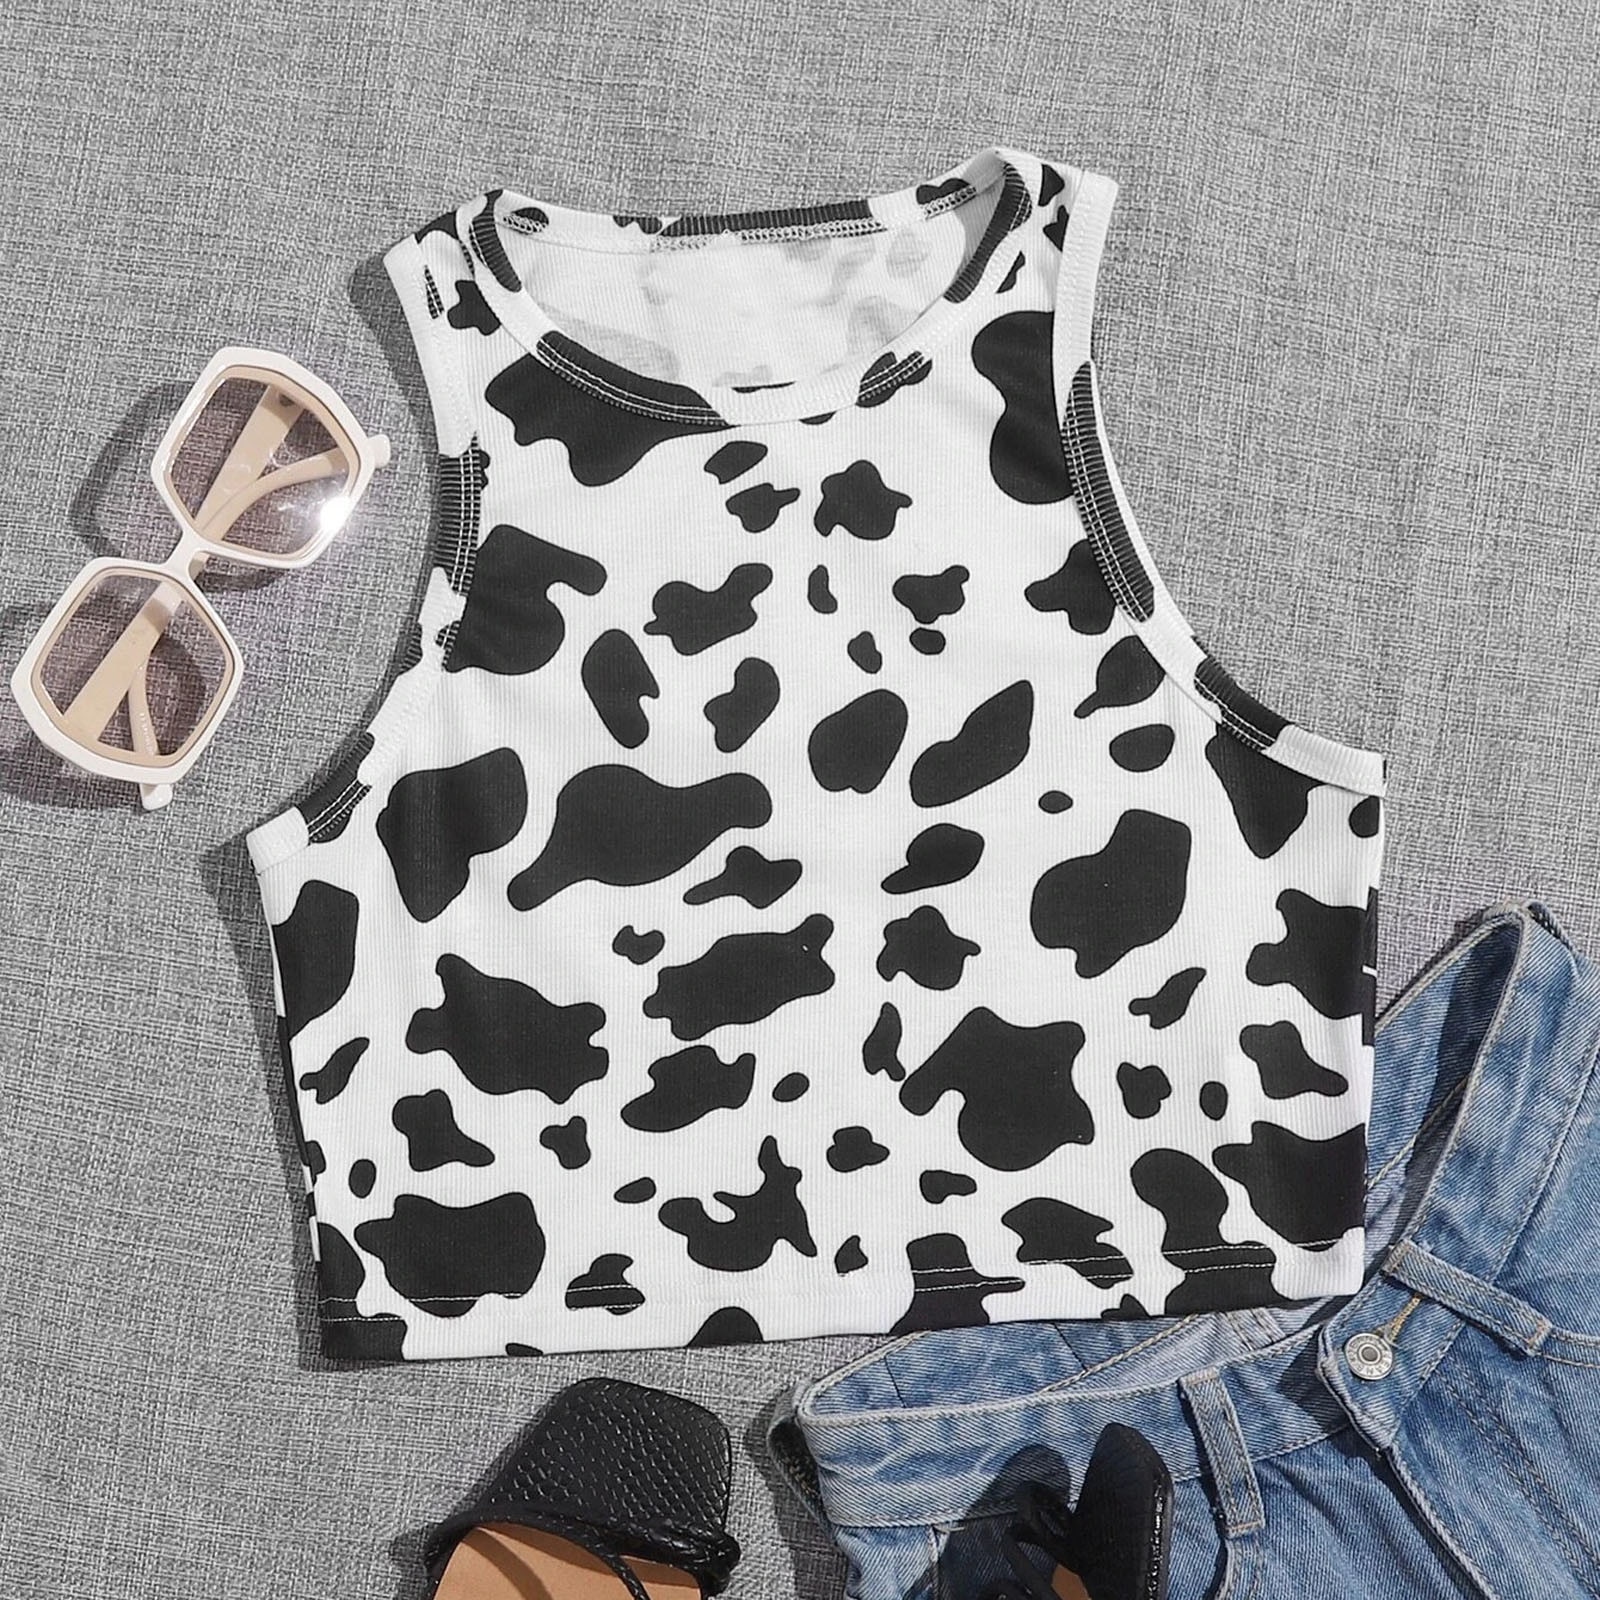 Sexy Women Crop Tops Cow Print Halter Strap Tanks Top Summer Skinny Backless Vest Teen Girls - The Cow Print